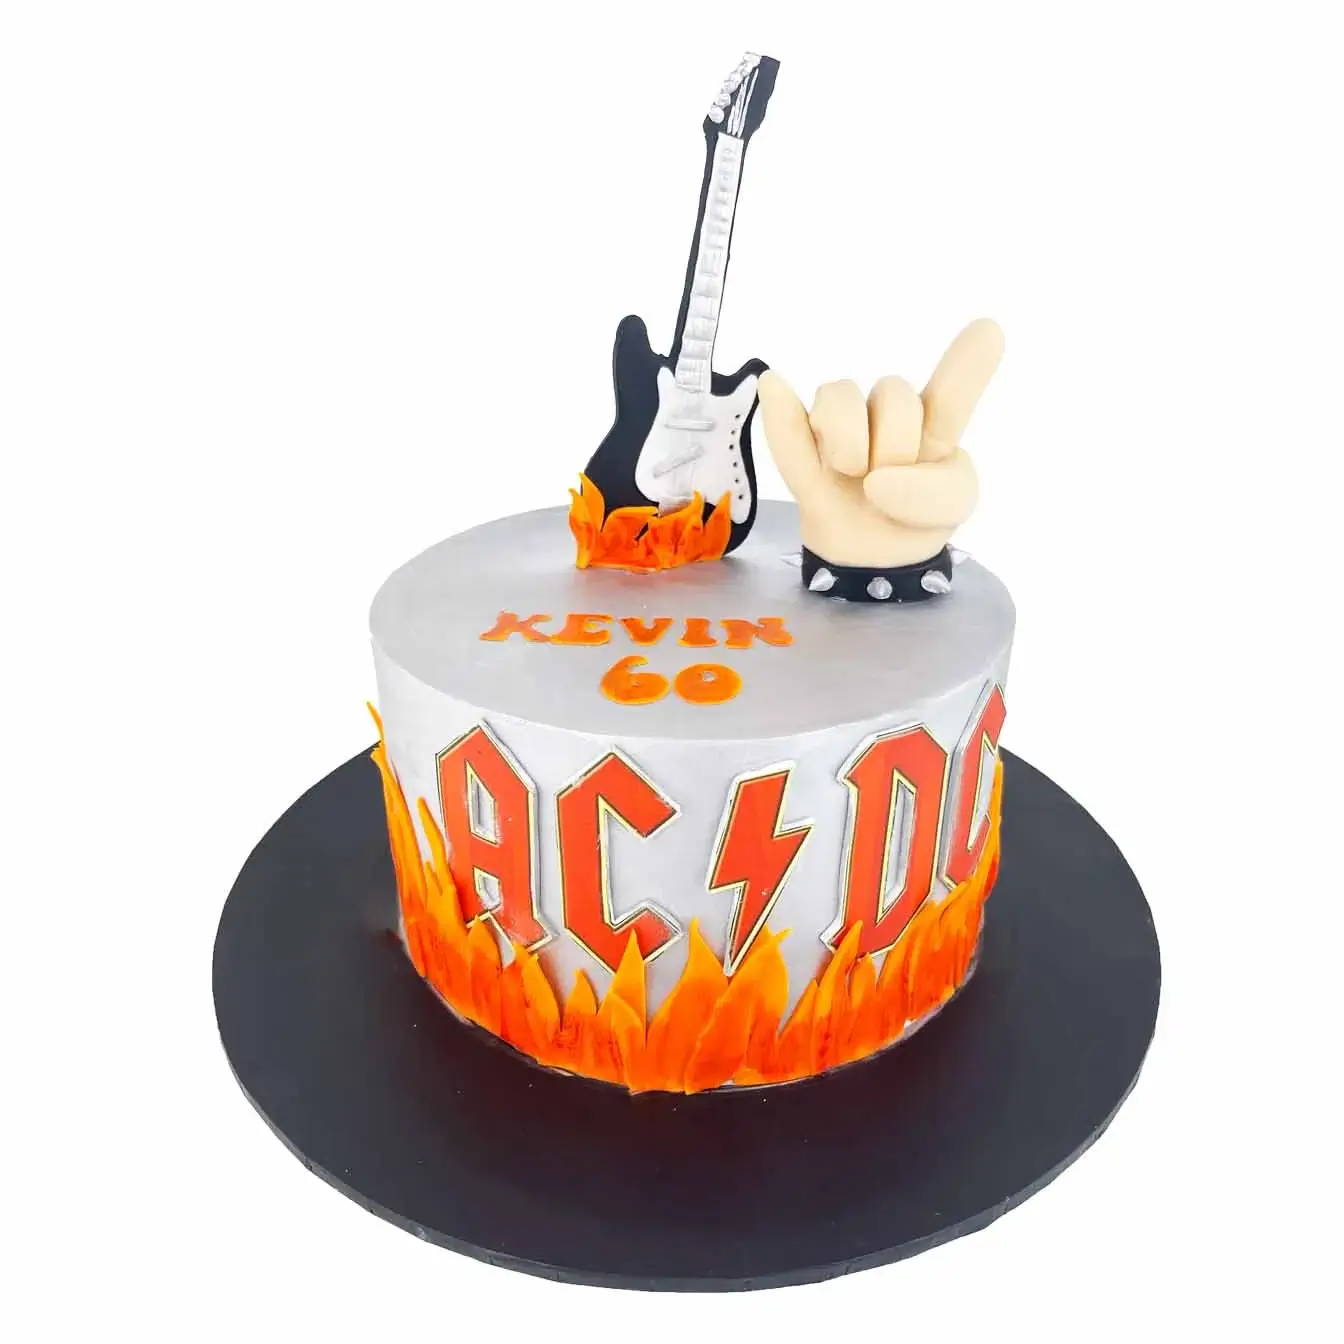 Rock 'n' Roll Voltage Cake - A silver cake with peace sign hands, electric guitar, and the AC/DC logo, a high-energy centerpiece for music lovers and AC/DC enthusiasts.